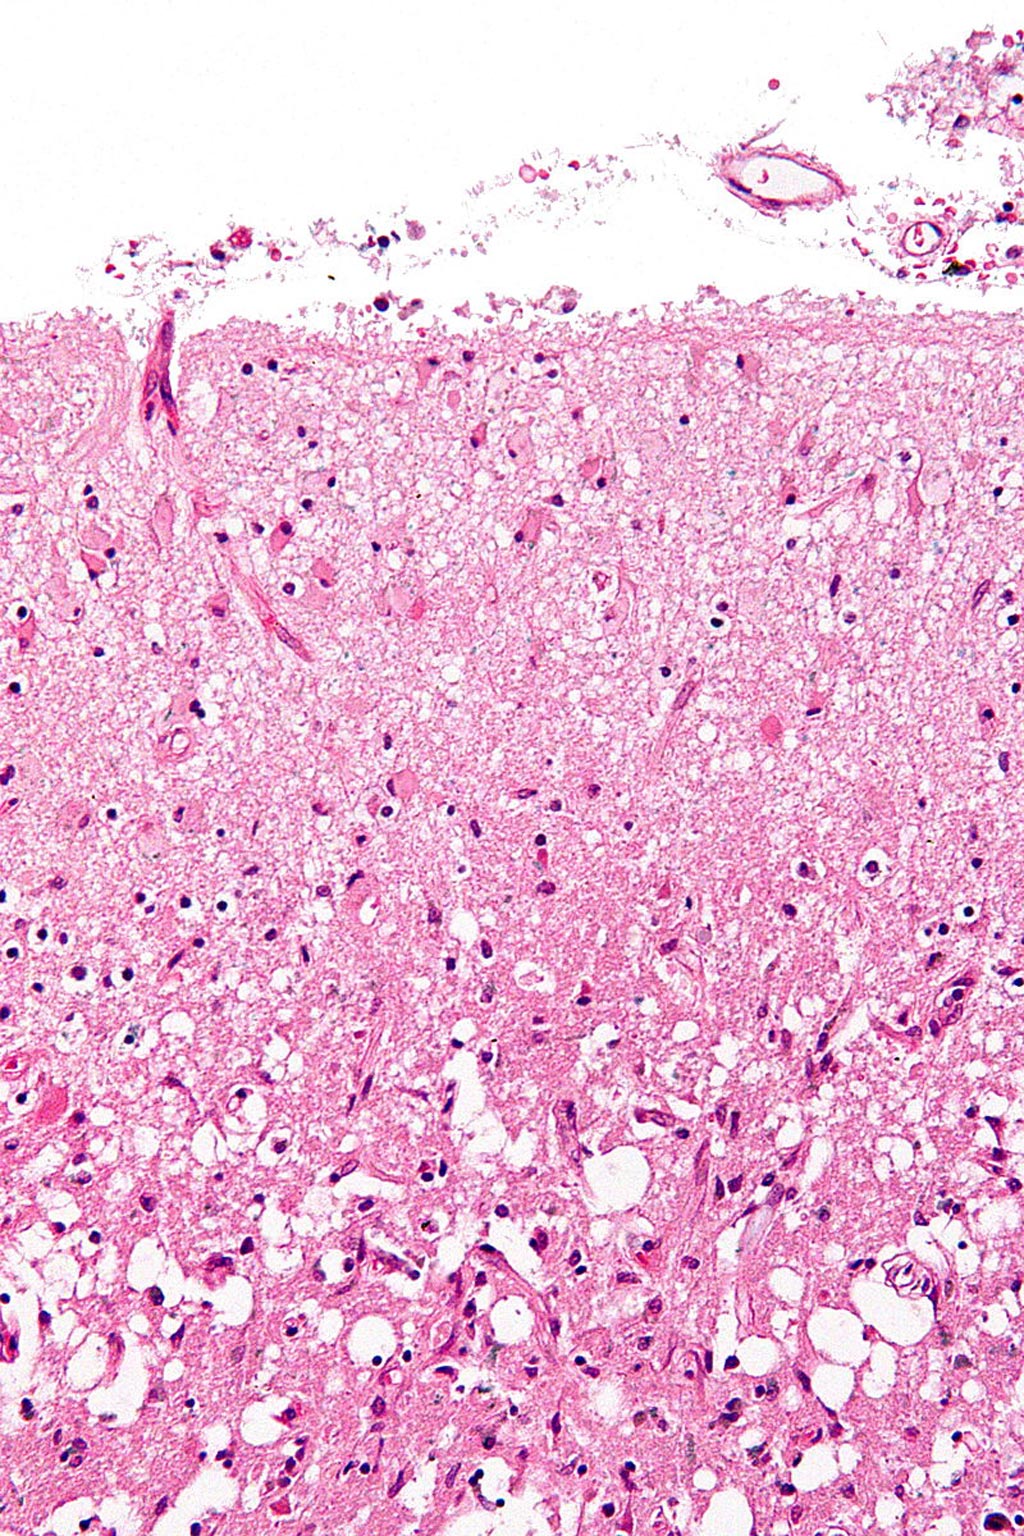 Image: A micrograph of the superficial cerebral cortex showing neuron loss and reactive astrocytes in a person who has had a stroke (Photo courtesy of Wikimedia Commons).